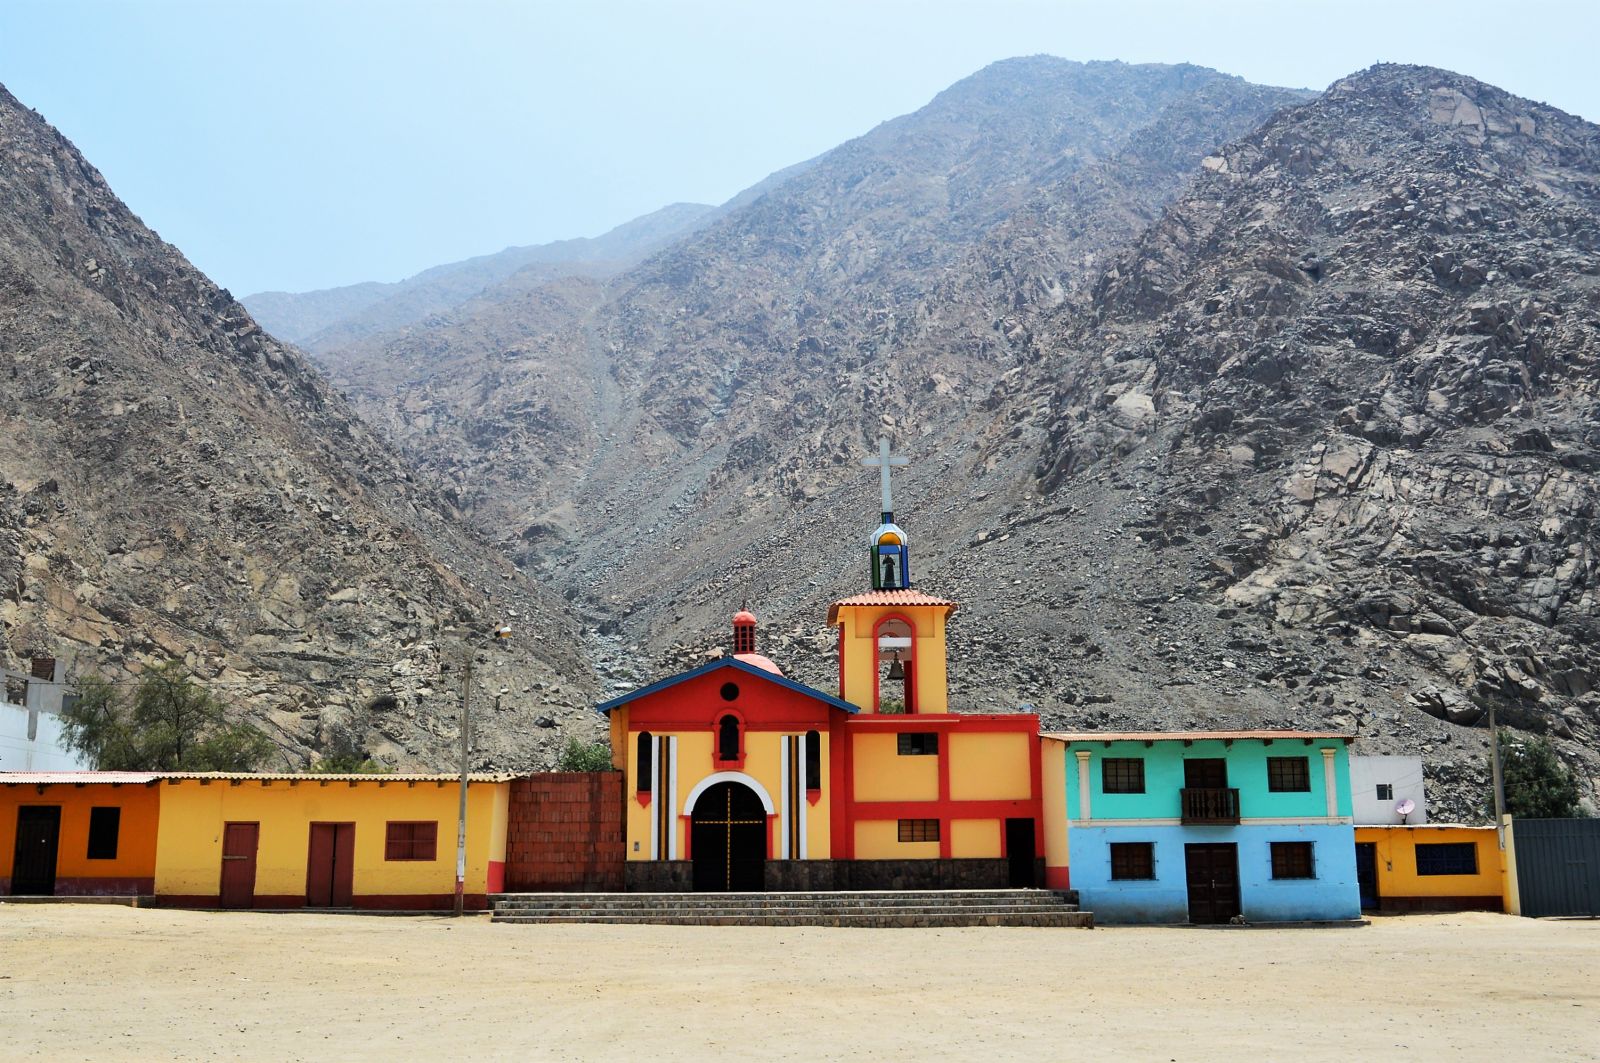 Small colorful villages are shining in the grey desert